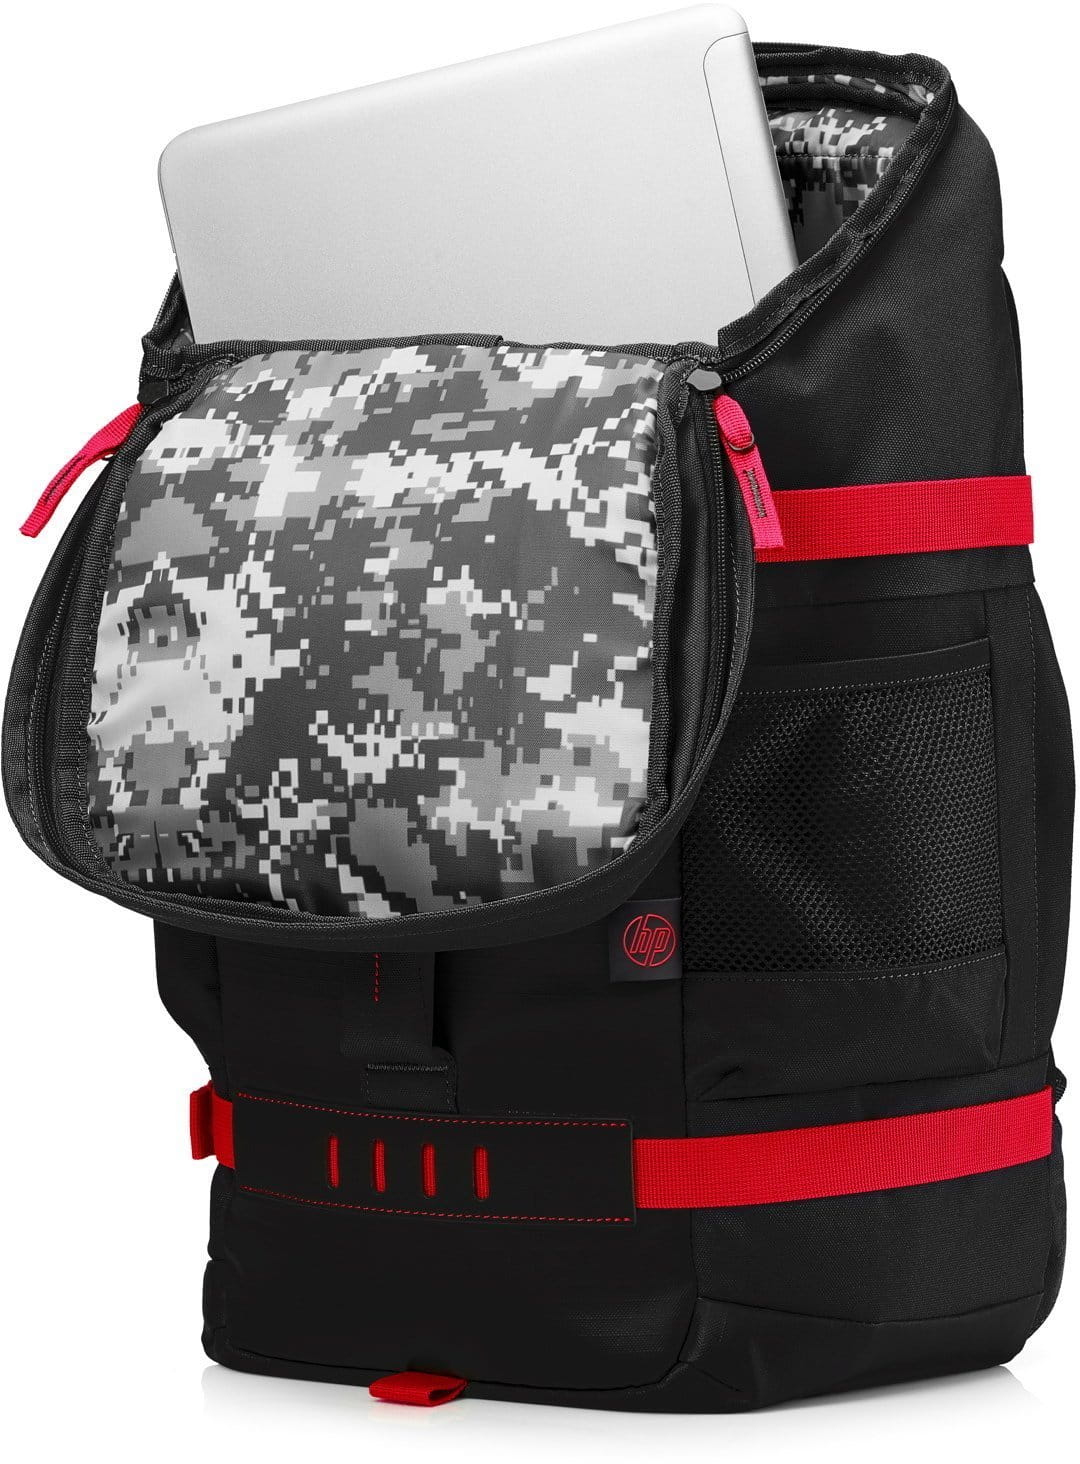 Backpack HP Odyssey / 15.6 /